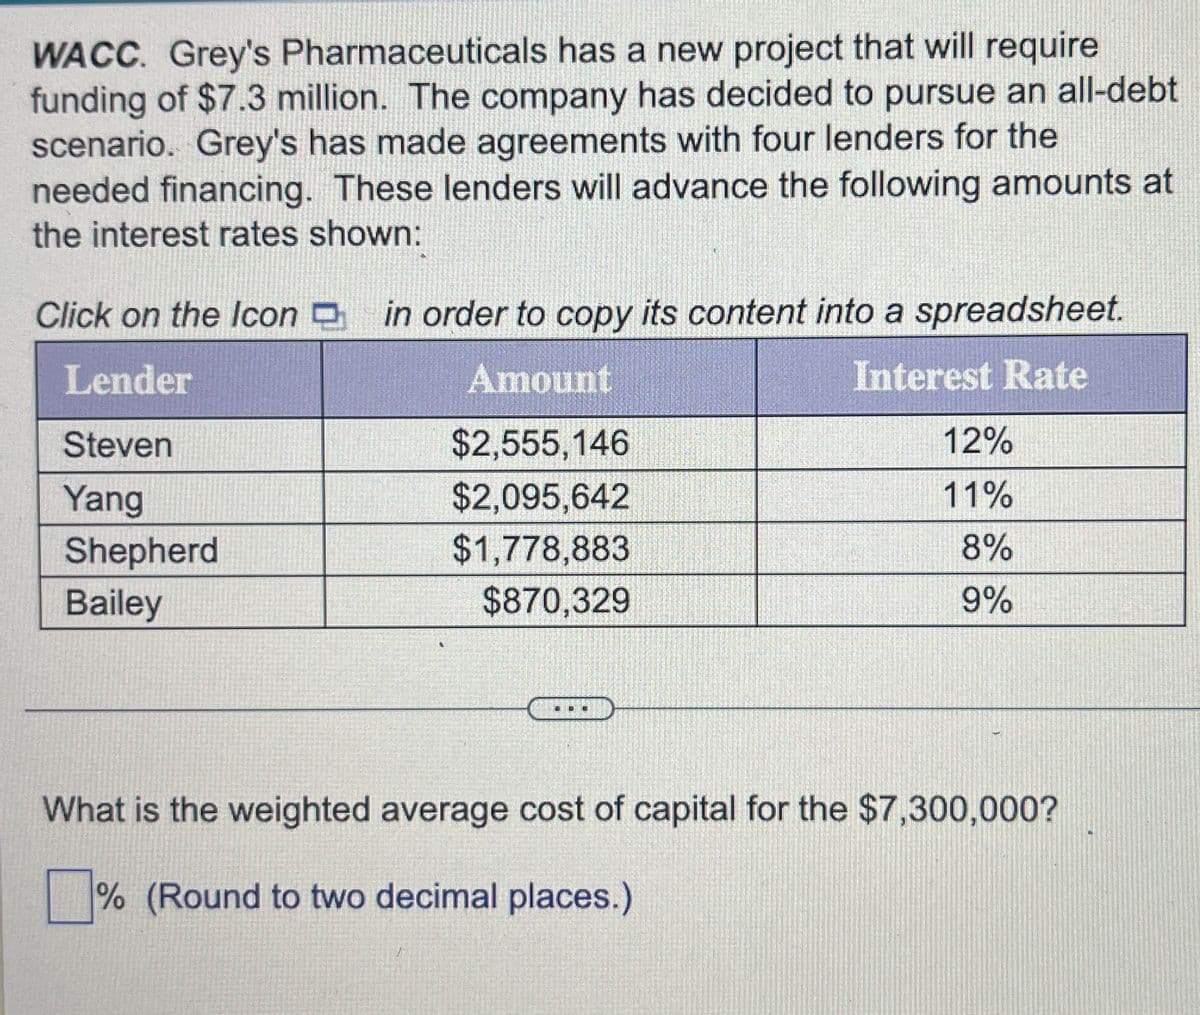 WACC. Grey's Pharmaceuticals has a new project that will require
funding of $7.3 million. The company has decided to pursue an all-debt
scenario. Grey's has made agreements with four lenders for the
needed financing. These lenders will advance the following amounts at
the interest rates shown:
Click on the Icon D in order to copy its content into a spreadsheet.
Lender
Amount
Interest Rate
Steven
$2,555,146
12%
Yang
$2,095,642
11%
Shepherd
$1,778,883
8%
Bailey
$870,329
9%
What is the weighted average cost of capital for the $7,300,000?
% (Round to two decimal places.)